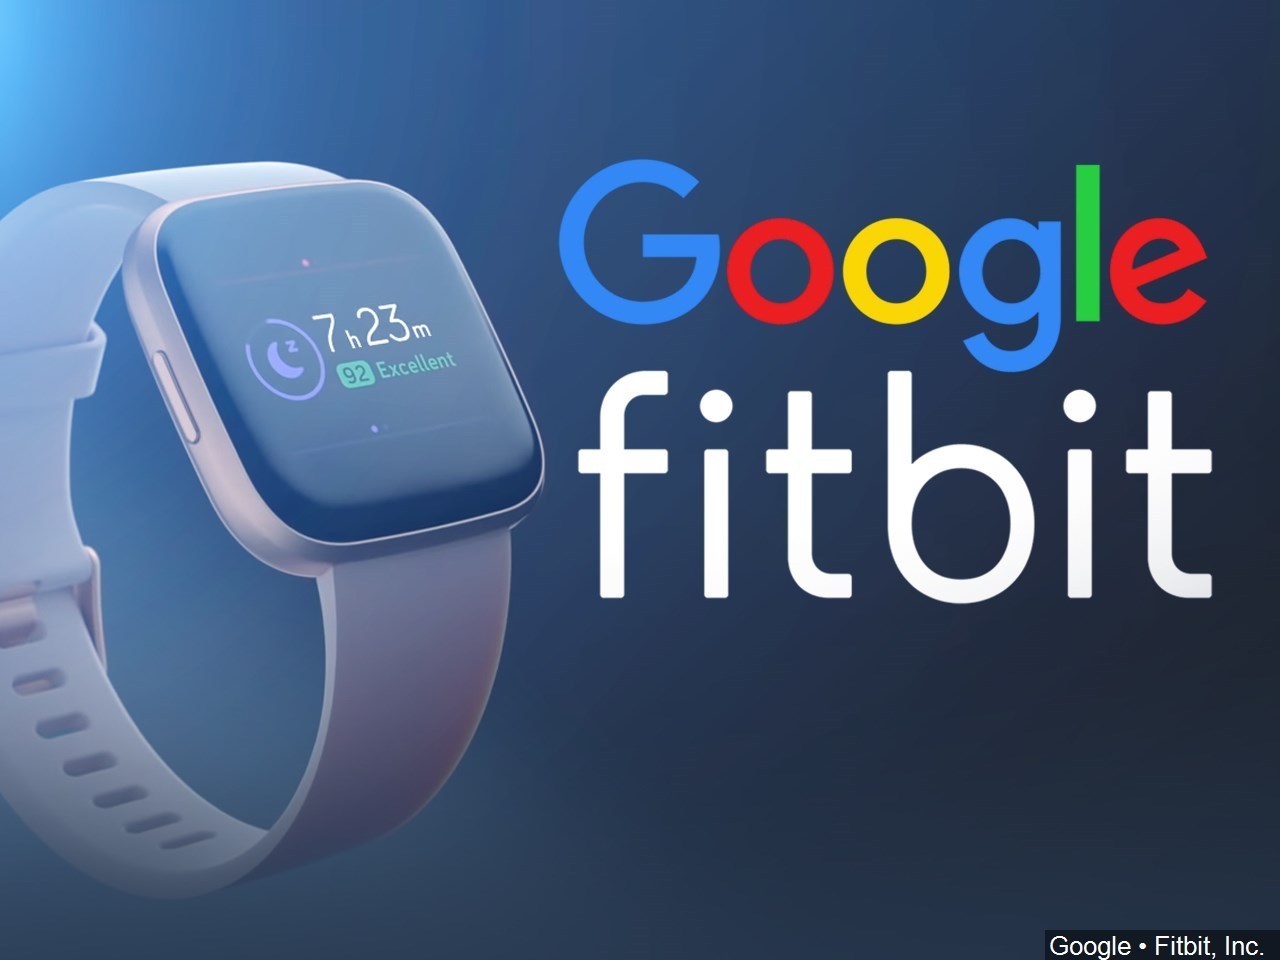 Fitbit, the Smartwatch maker, acquired by Google for 2.1B